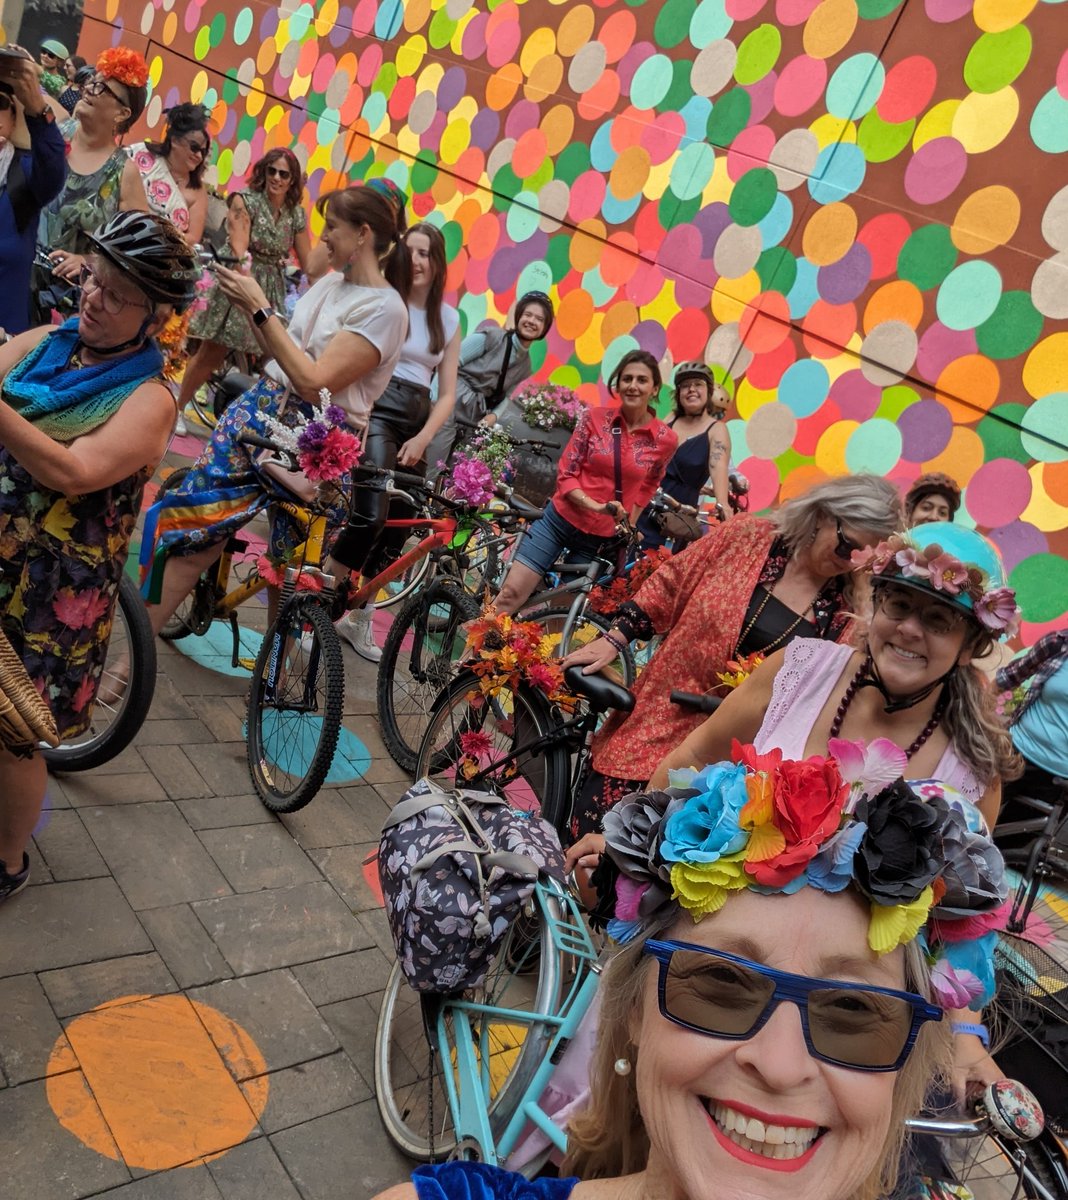 Heads up, 🚲🎉💃🏽☂️👠🪻🌺Fancies!

 🚲We're riding Sunday, June 9 (∆'d from 2)
🚲Sunday after World Bicycle Day 
🚲 Celebrate Bicycle Month(June!)
🚲 Noon start from City Hall
🚲Route forthcoming 

SAVE THE DATE! SPREAD THE NEWS!

#FWBRyeg2024
#JuneIsBikeMonth
#WorldBicycleDay